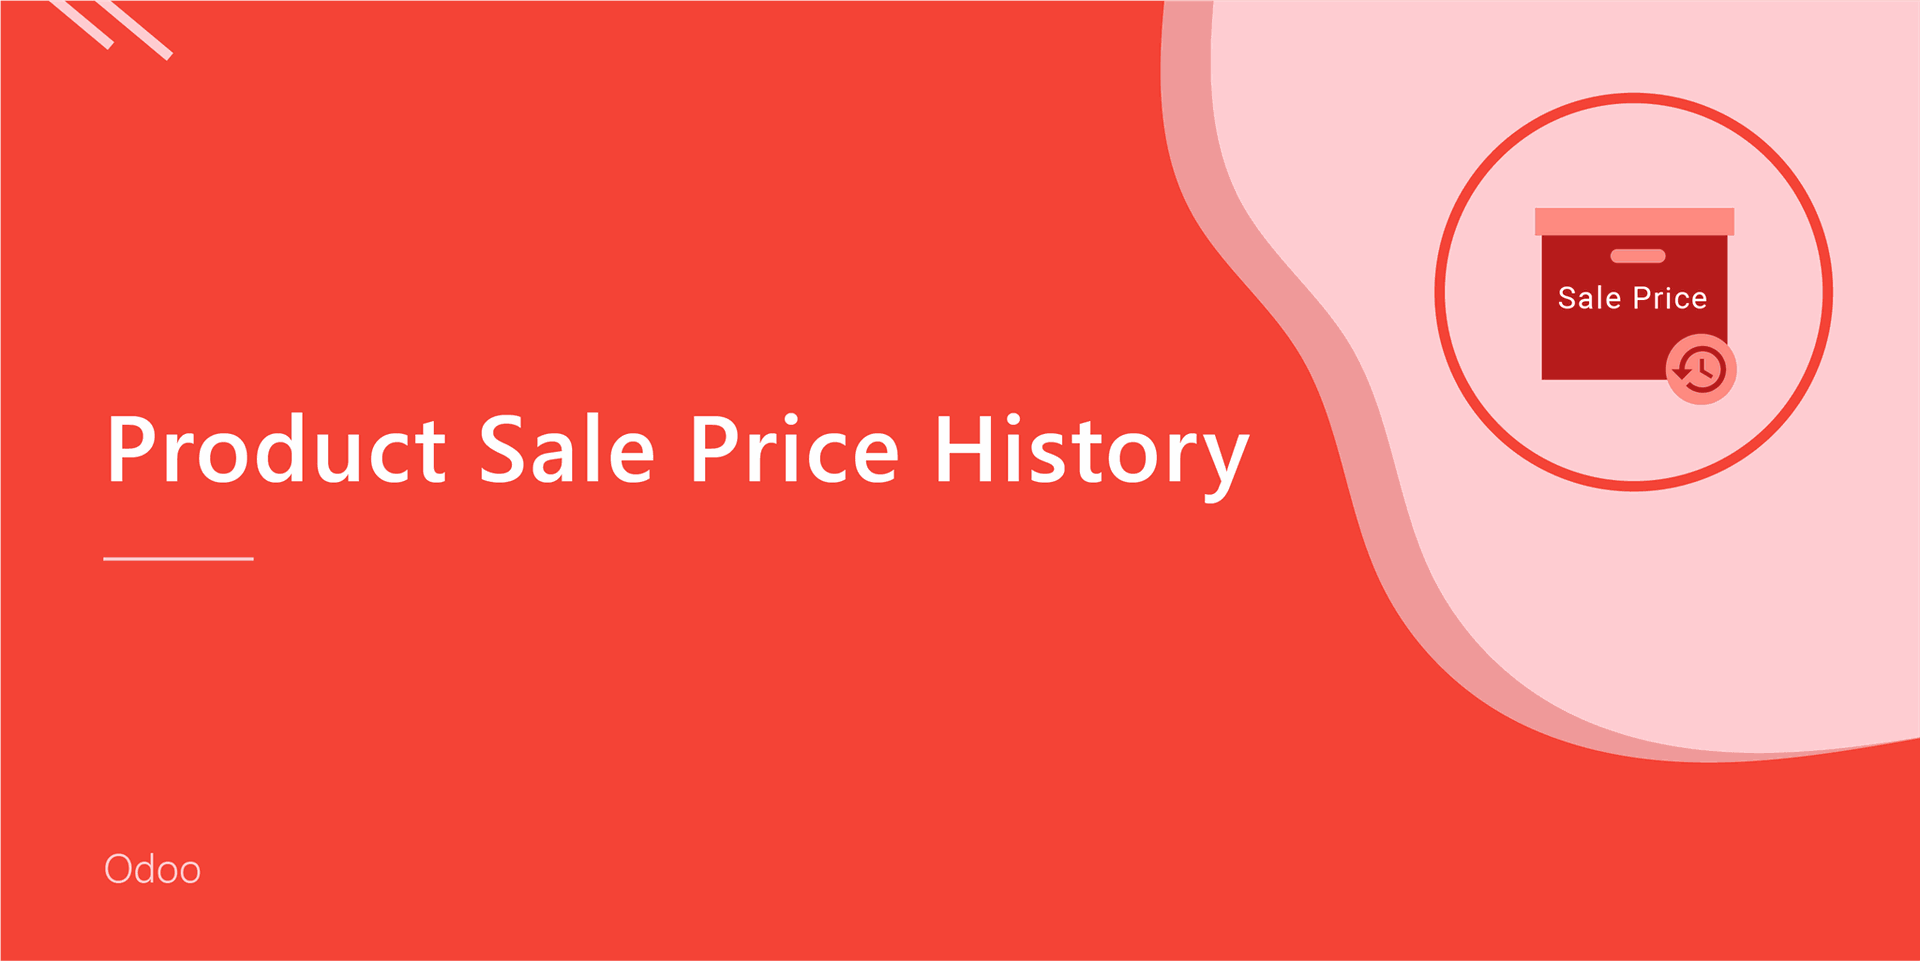 Product Sale Price History
